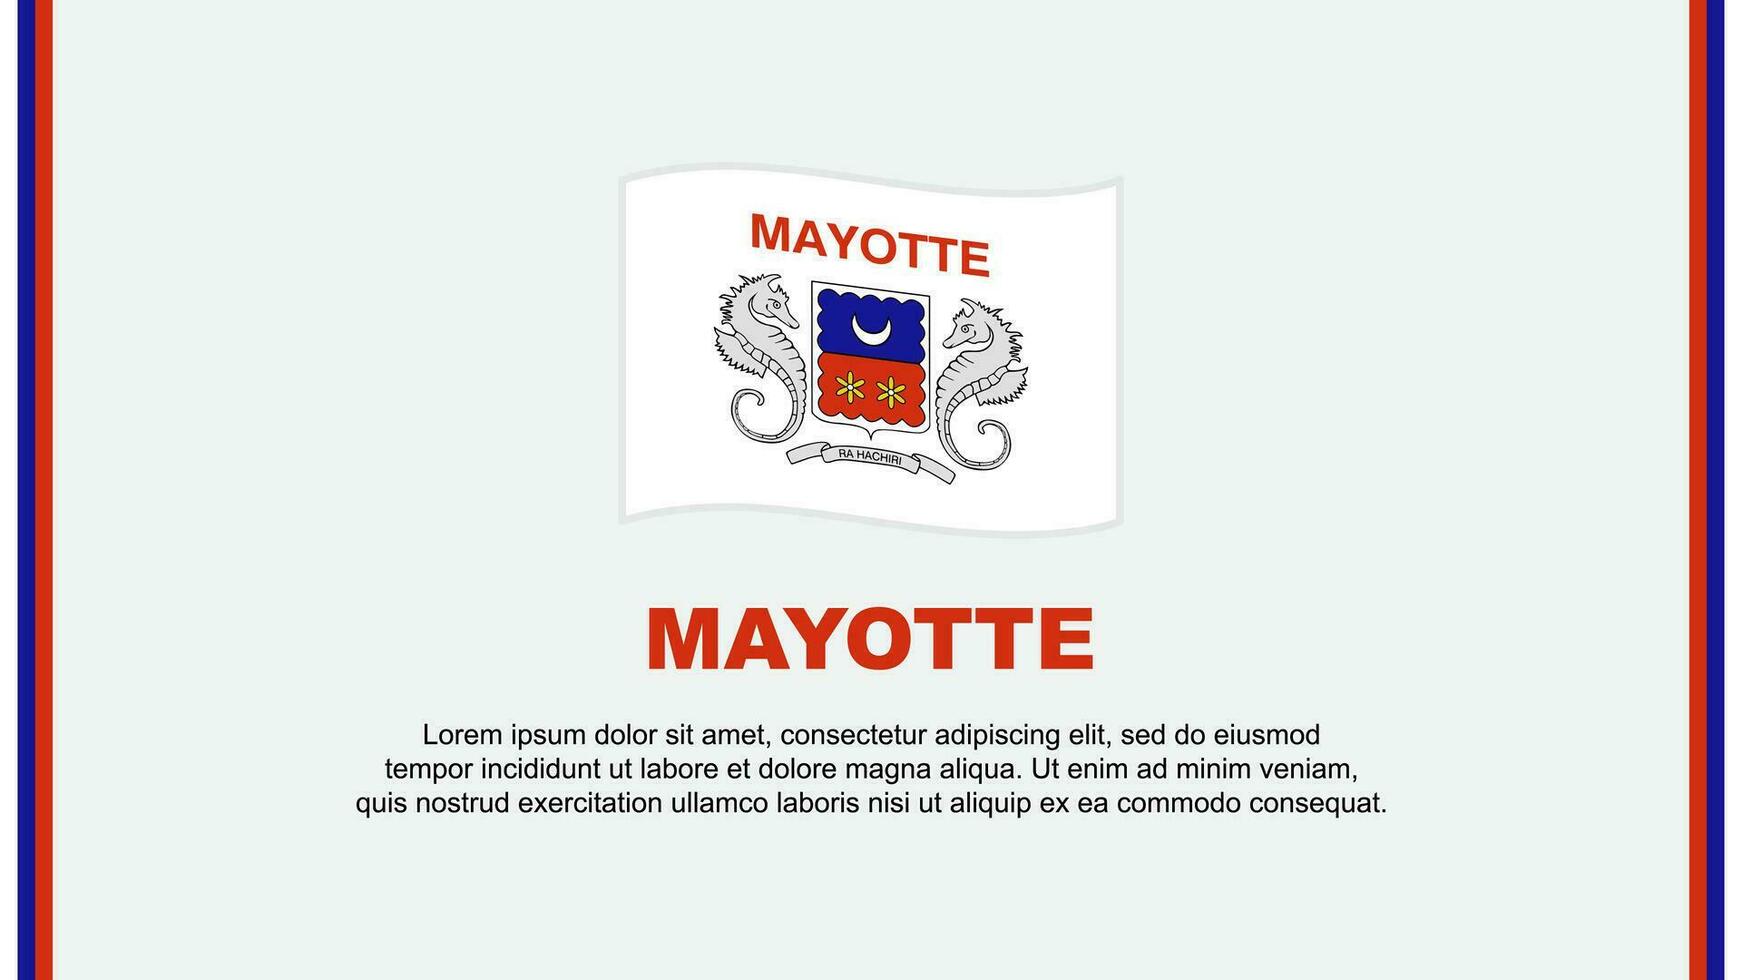 Mayotte Flag Abstract Background Design Template. Mayotte Cartoon vector